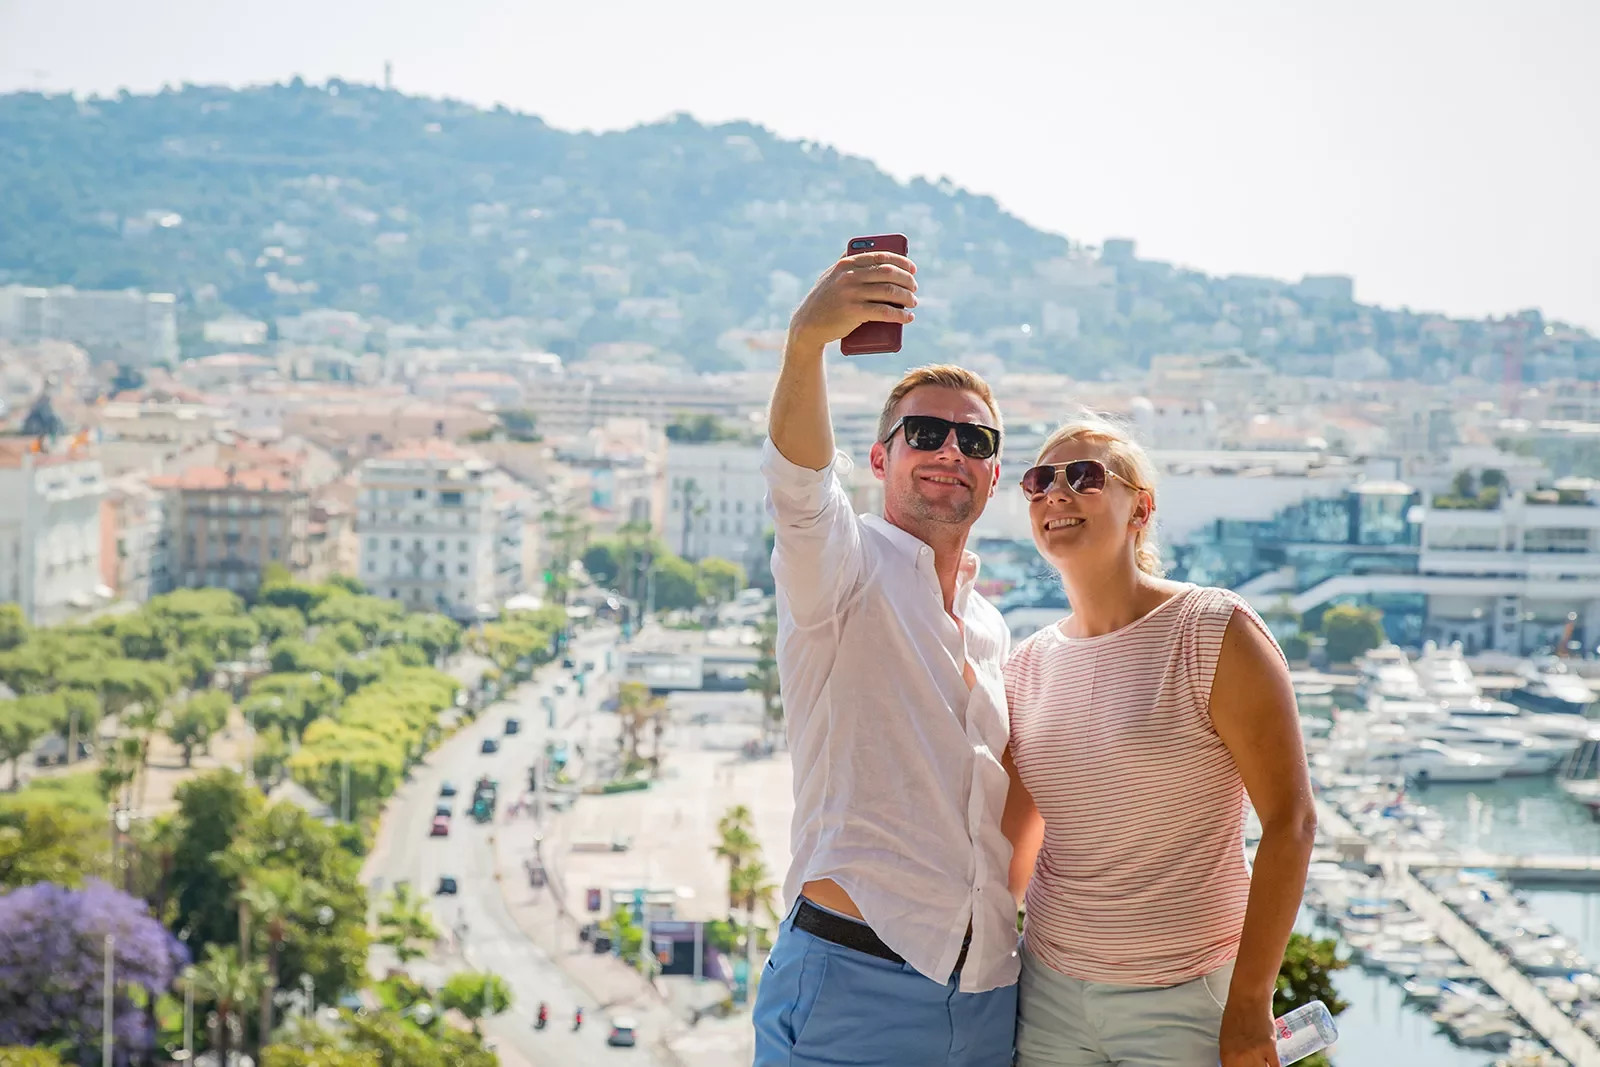 Two Backroads guests taking a selfie in front of a seaside town